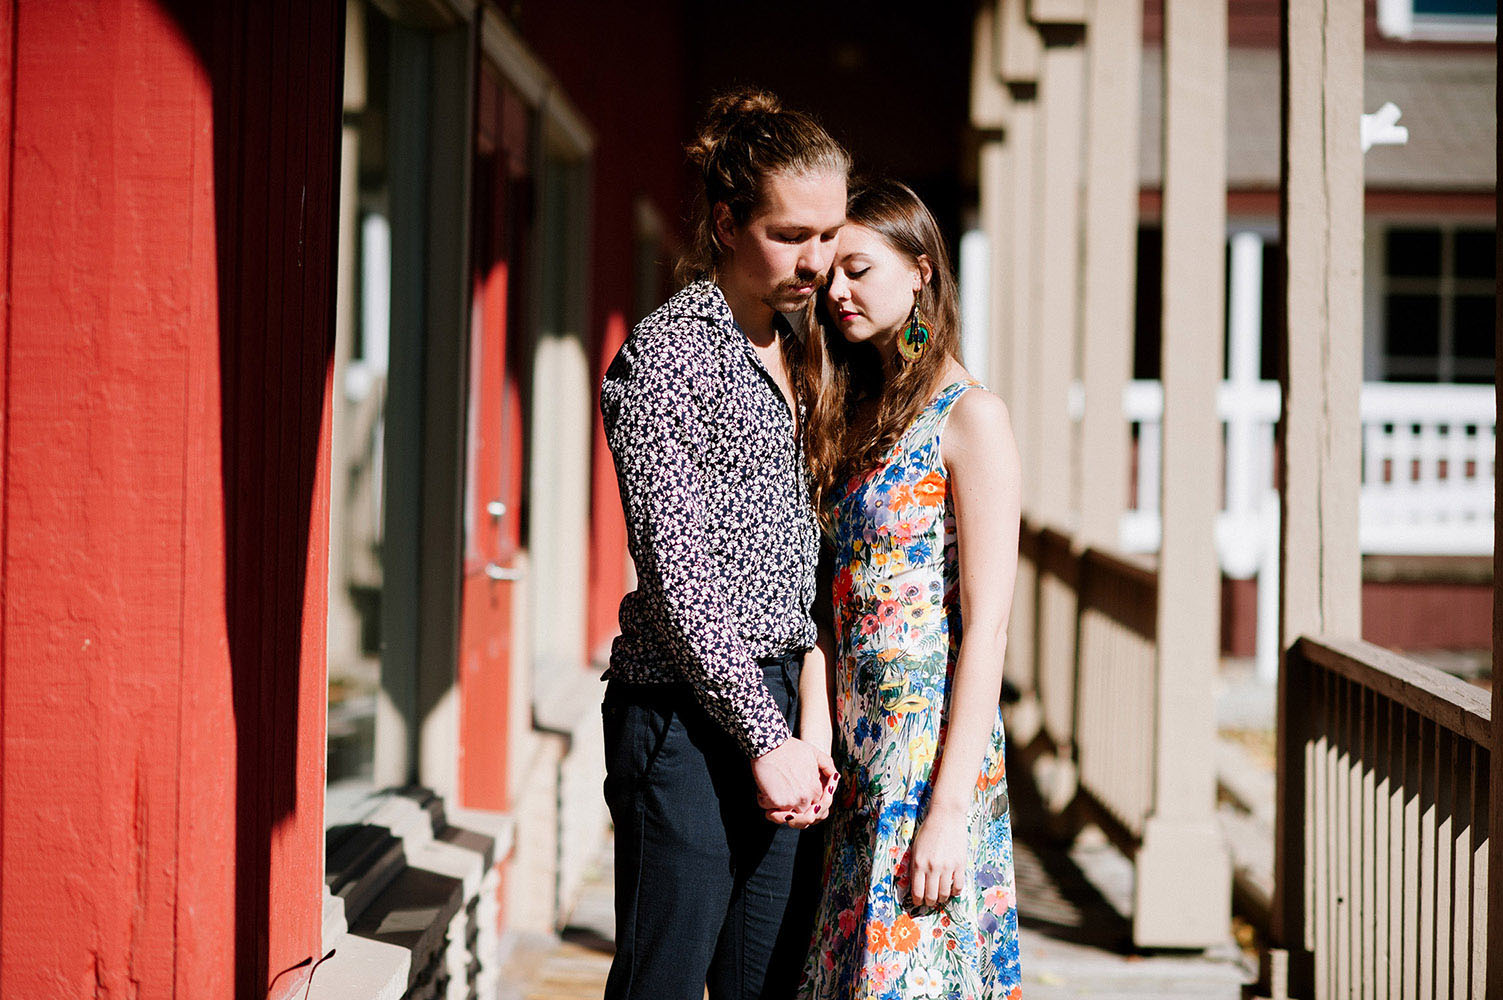 white male with facial hair and man bun with blue print shirt and female with long brown hair, peacock feahter earrings and floral print dress embracing